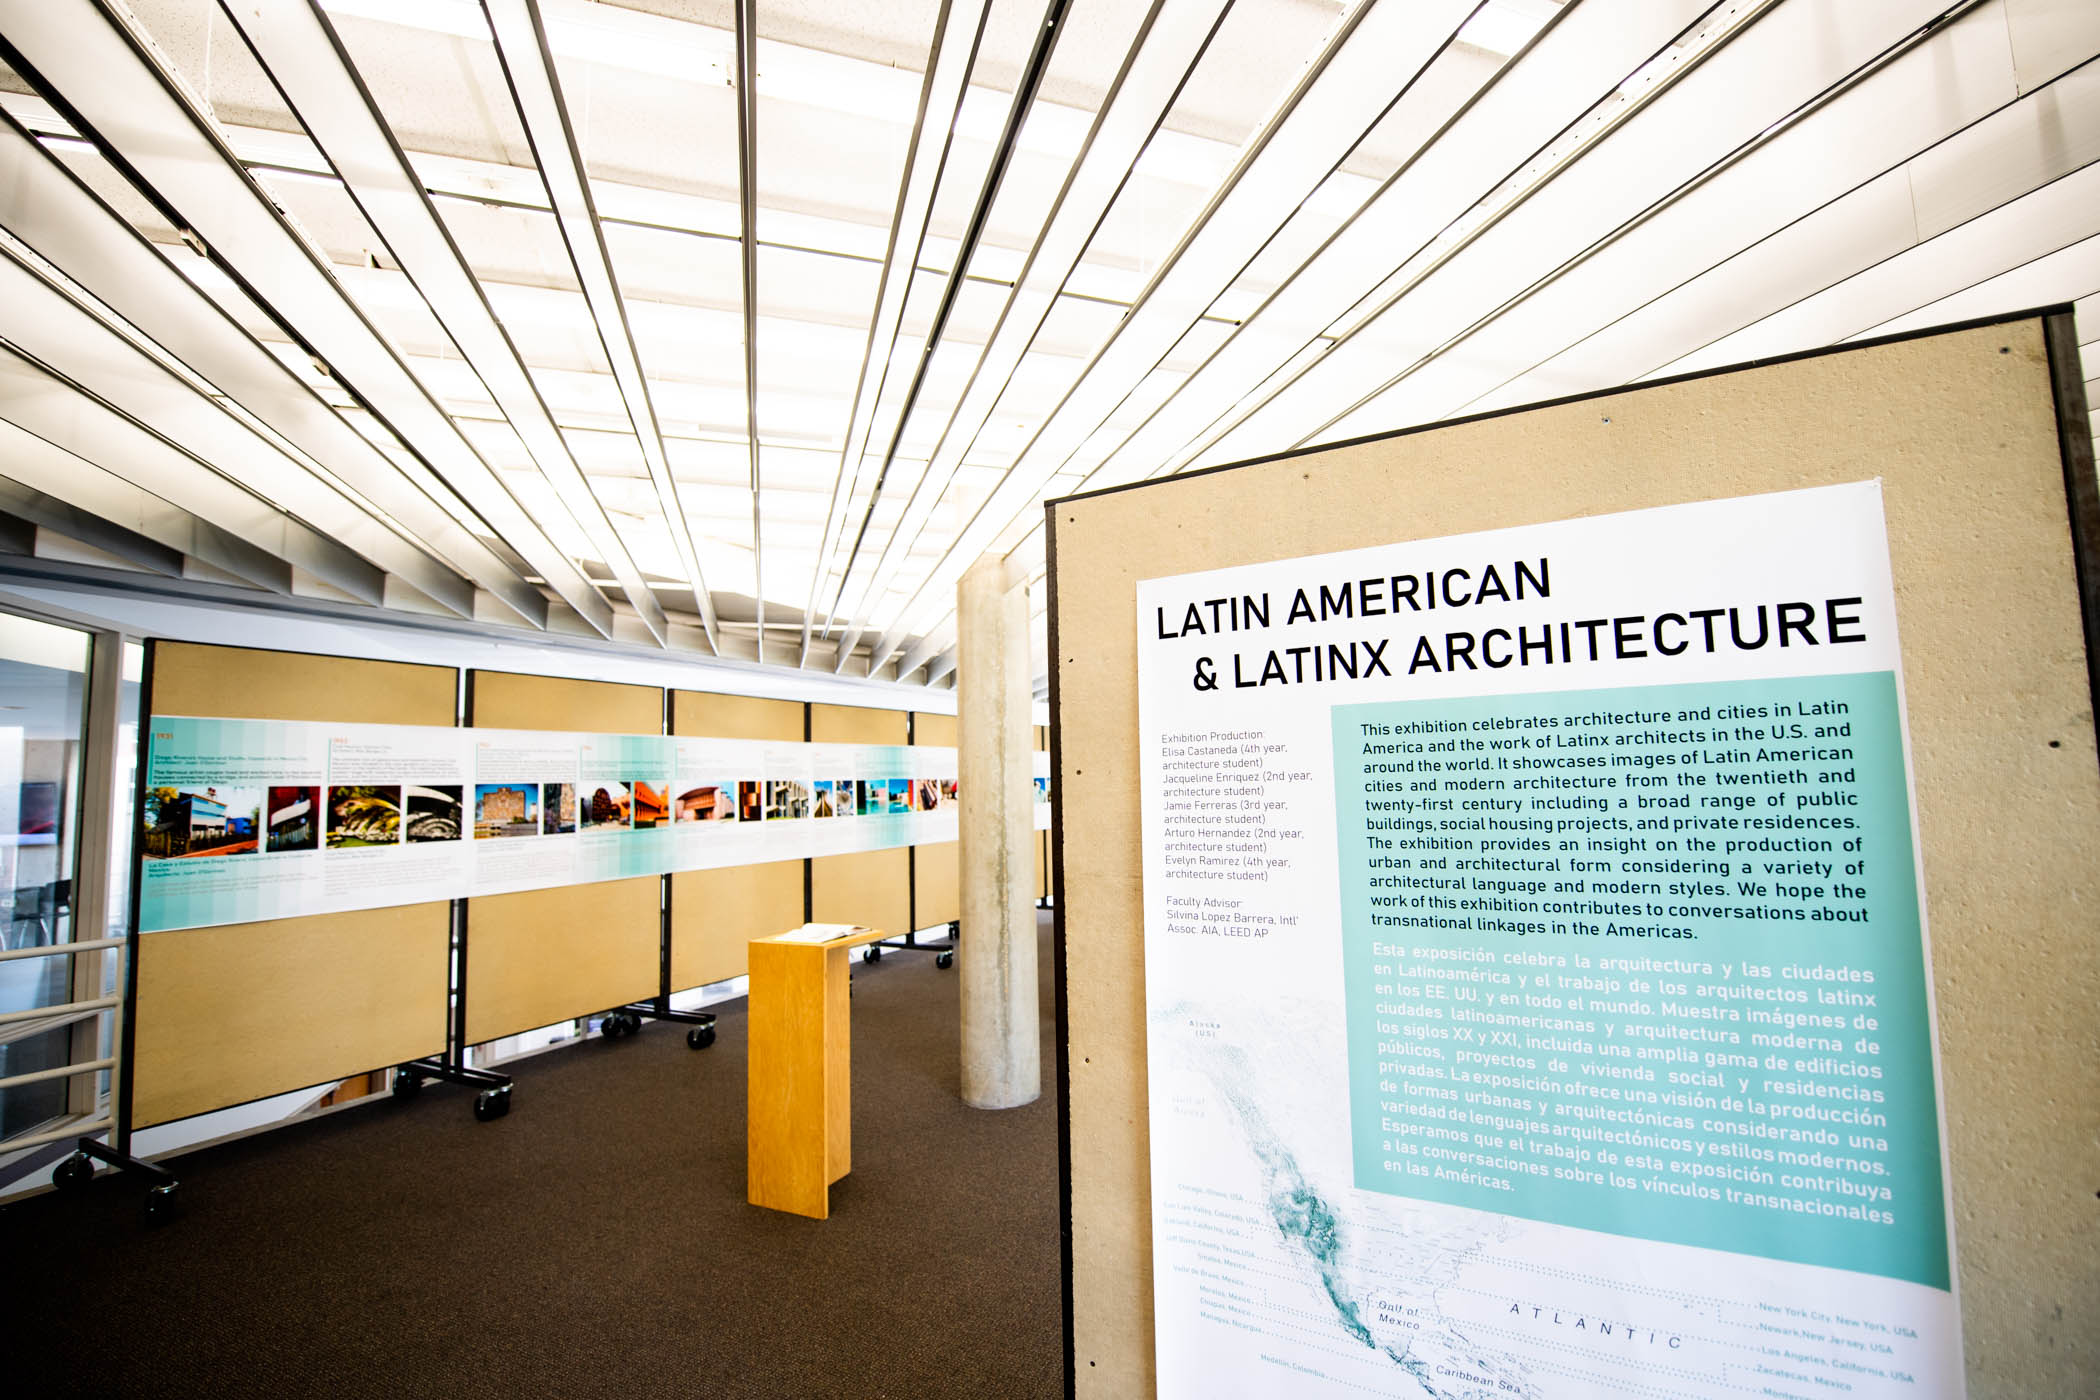 The MSU College of Architecture, Art and Design throughout the month hosts the Latin American and Latinx Architecture Exhibition, showcasing images of Latin American cities and modern architecture from the 20th and 21st centuries. In McNeel Gallery at Giles Hall, the show’s goal is to open conversations about transnational linkages in the Americas